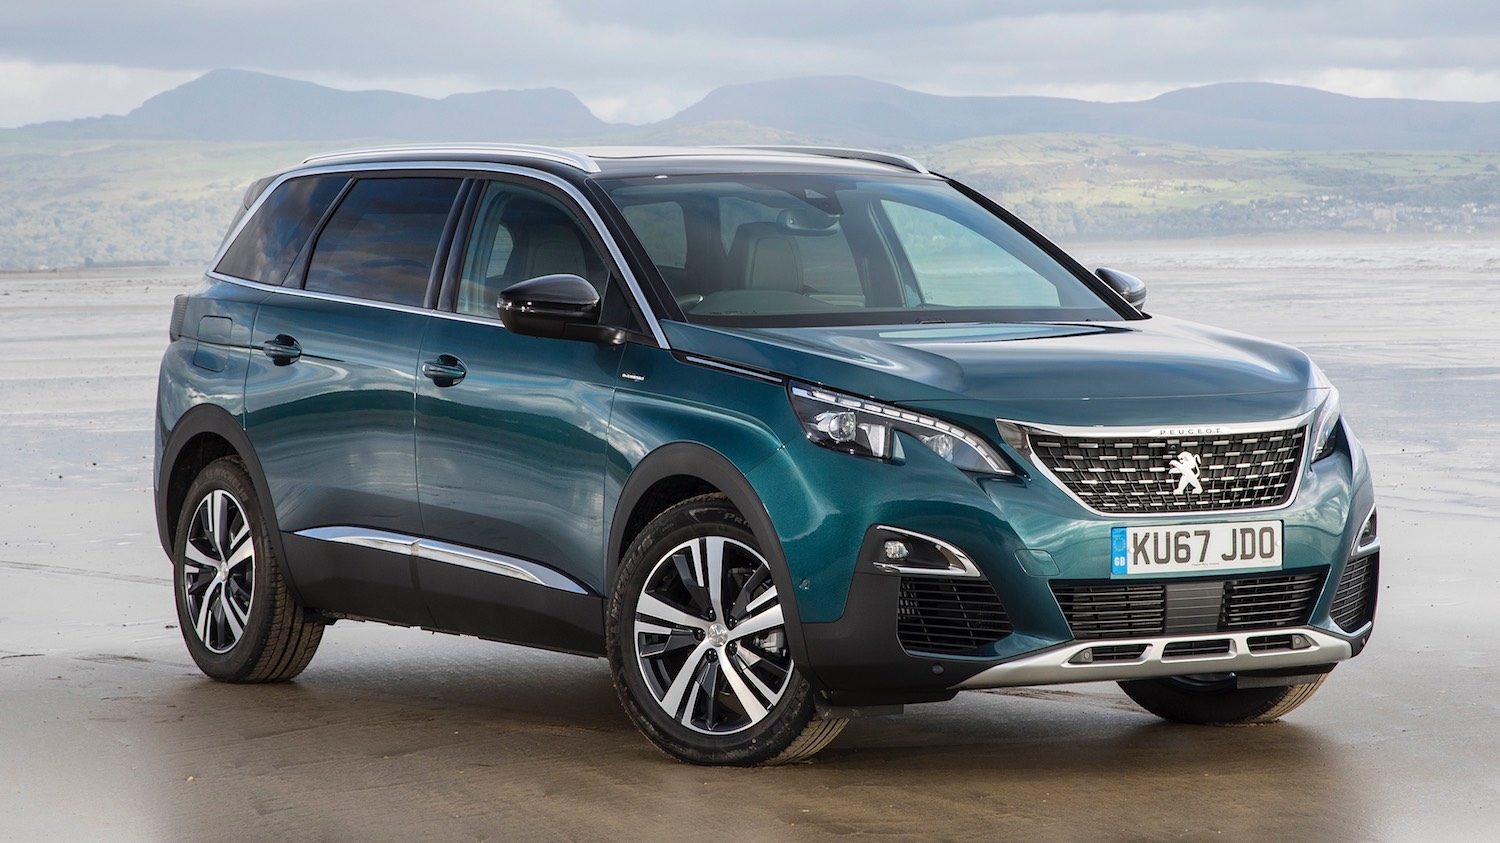 Drive.co.uk Reviewed The Peugeot 5008 and the Citroen